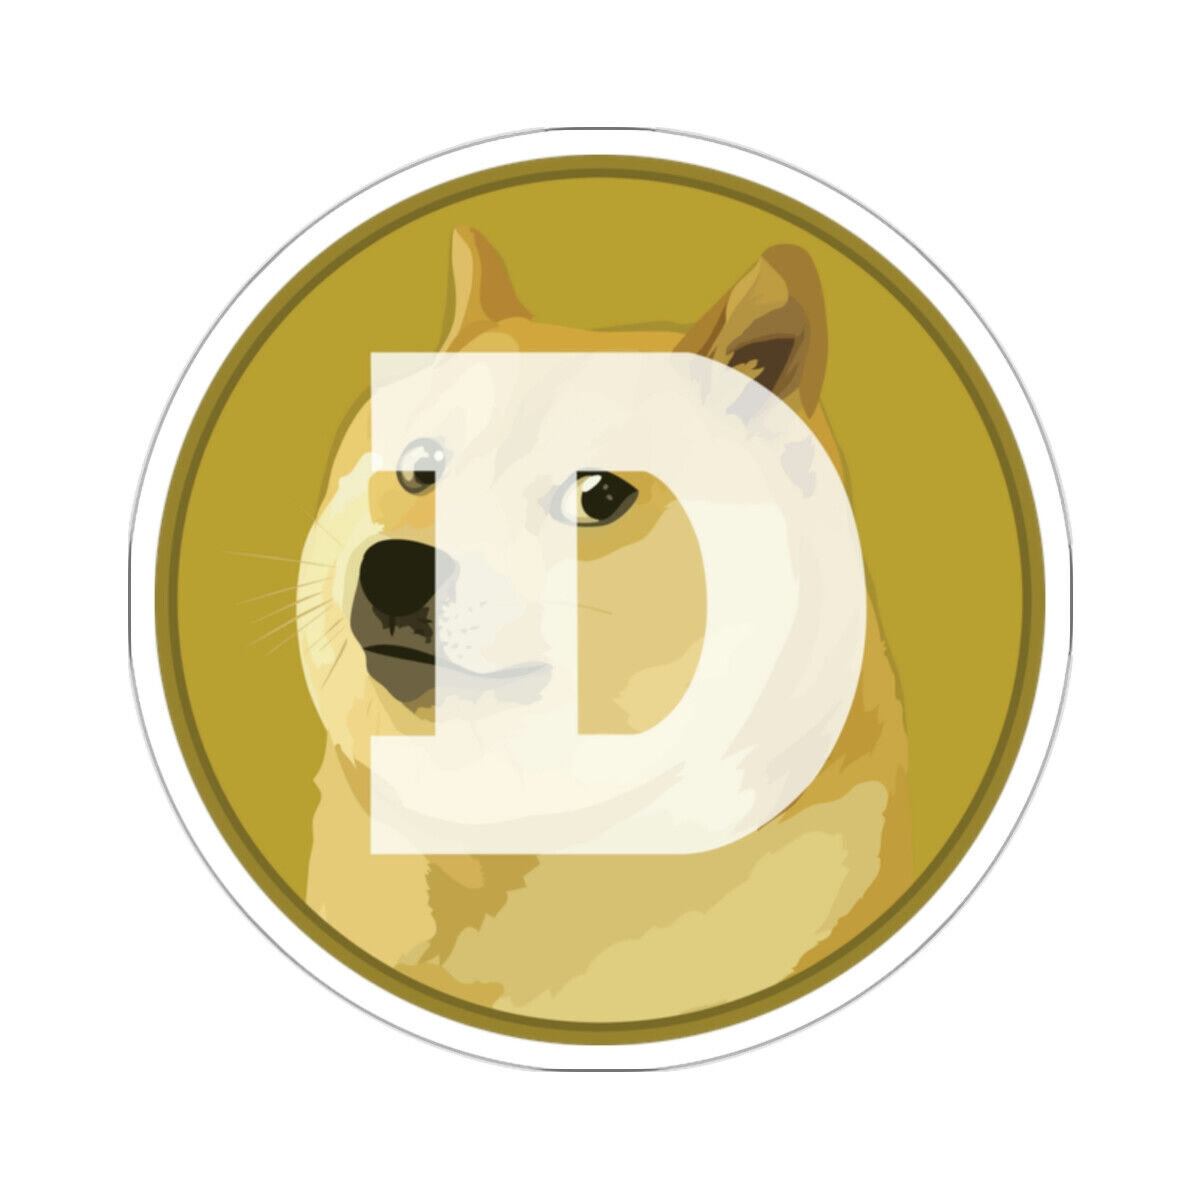 DOGECOIN DOGE (Cryptocurrency) STICKER Vinyl Die-Cut Decal